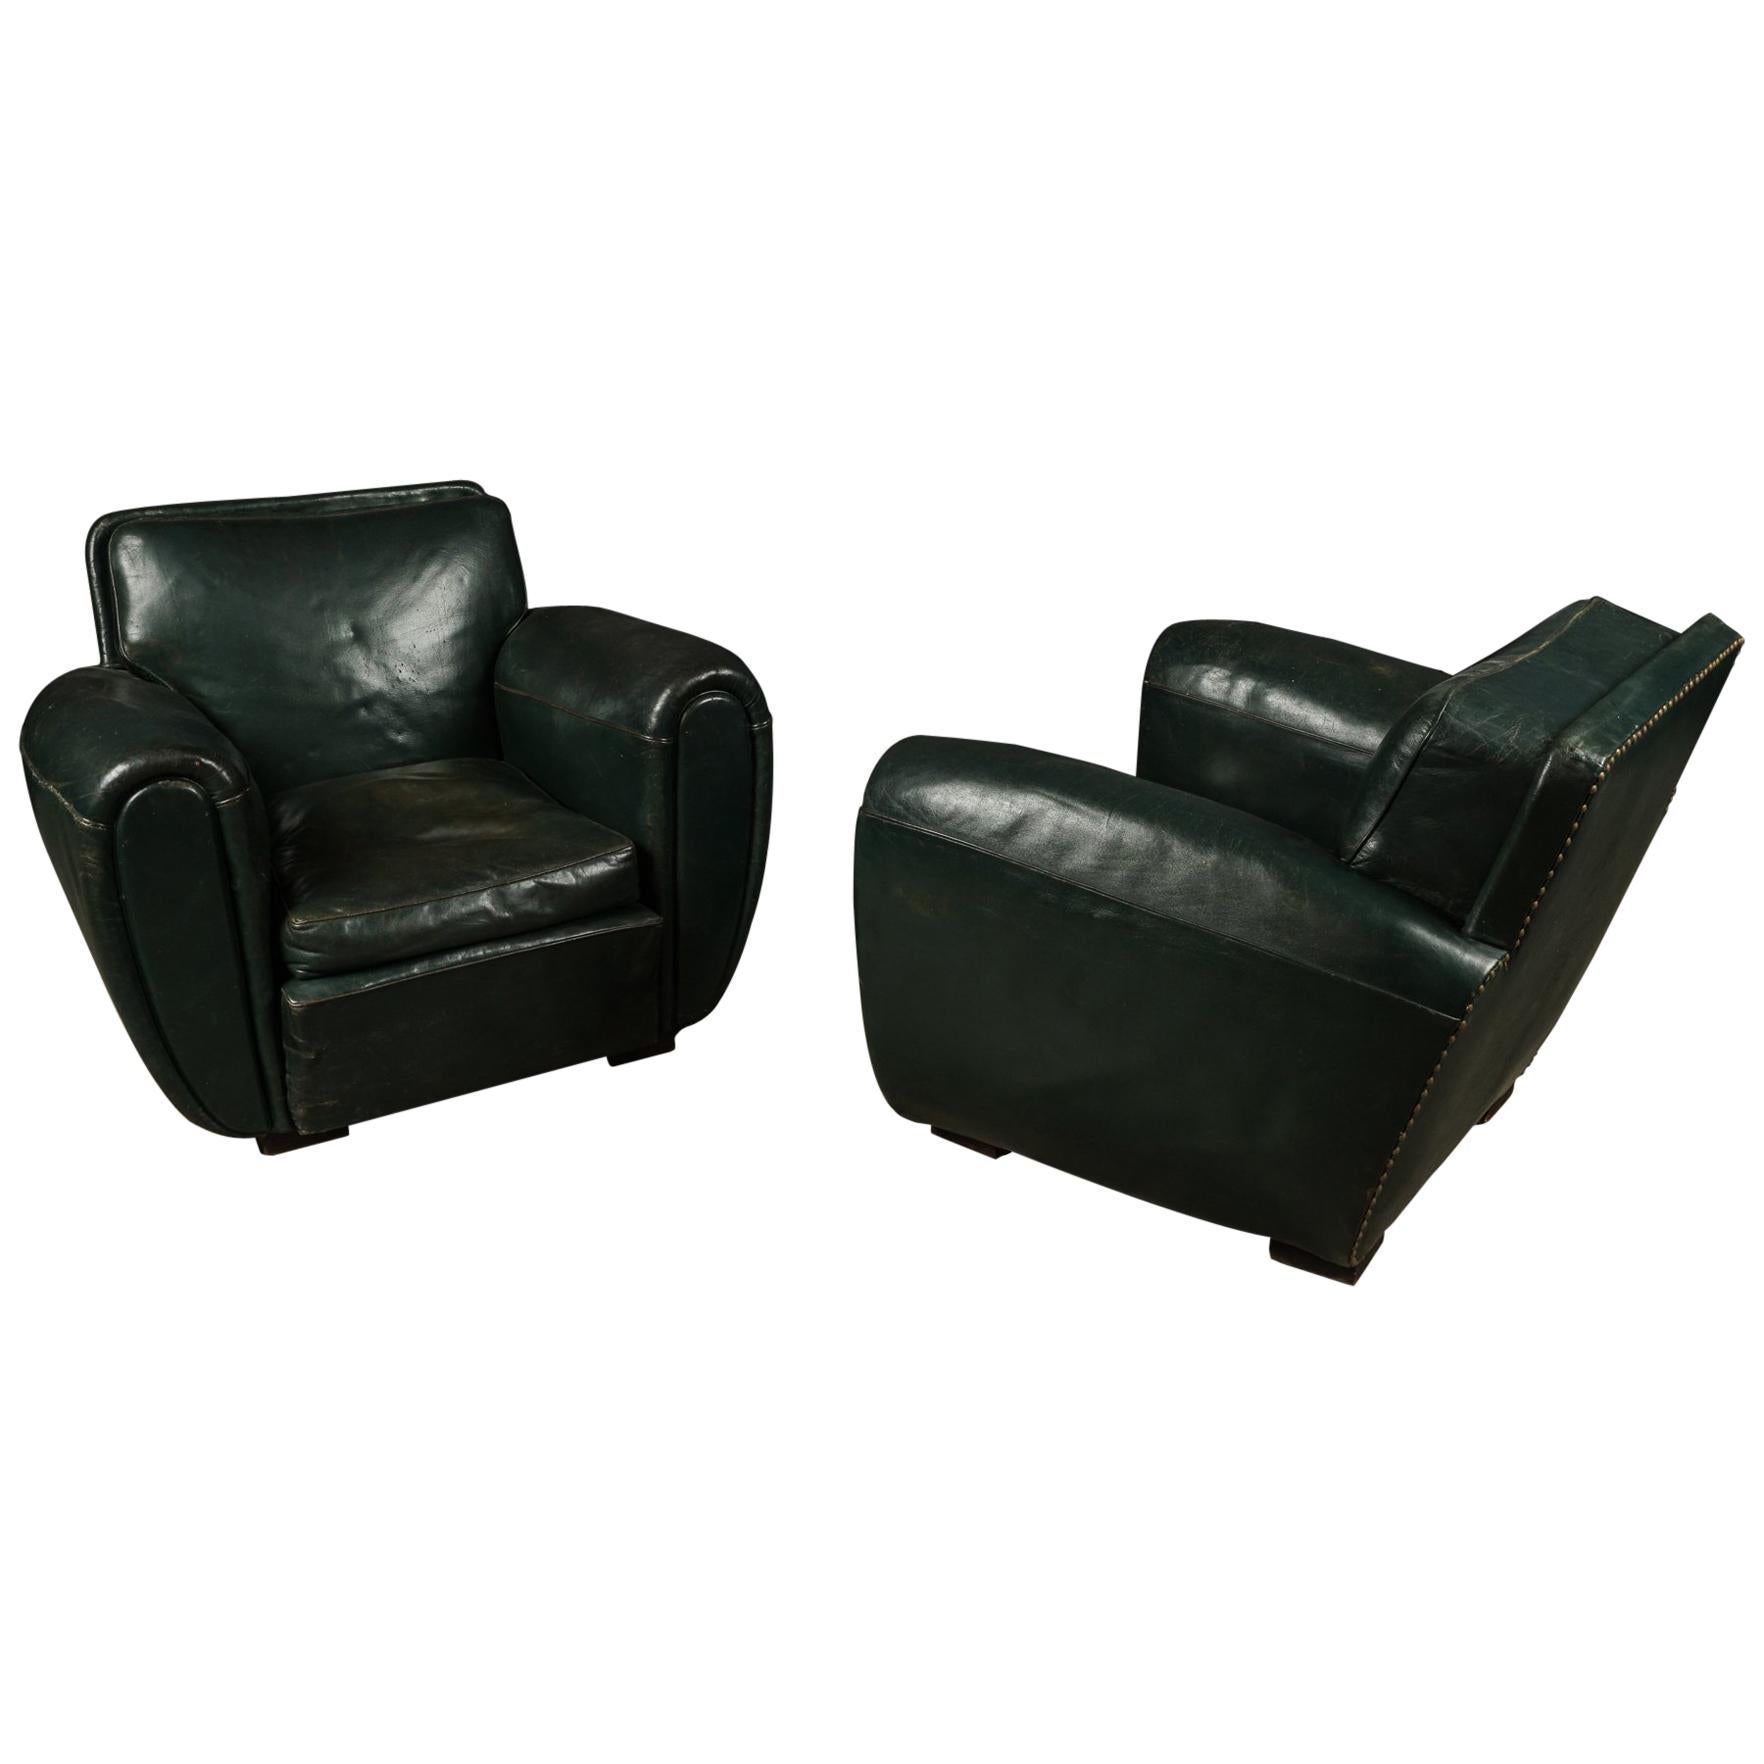 Rare Pair of Leather Club Chairs from France, circa 1950